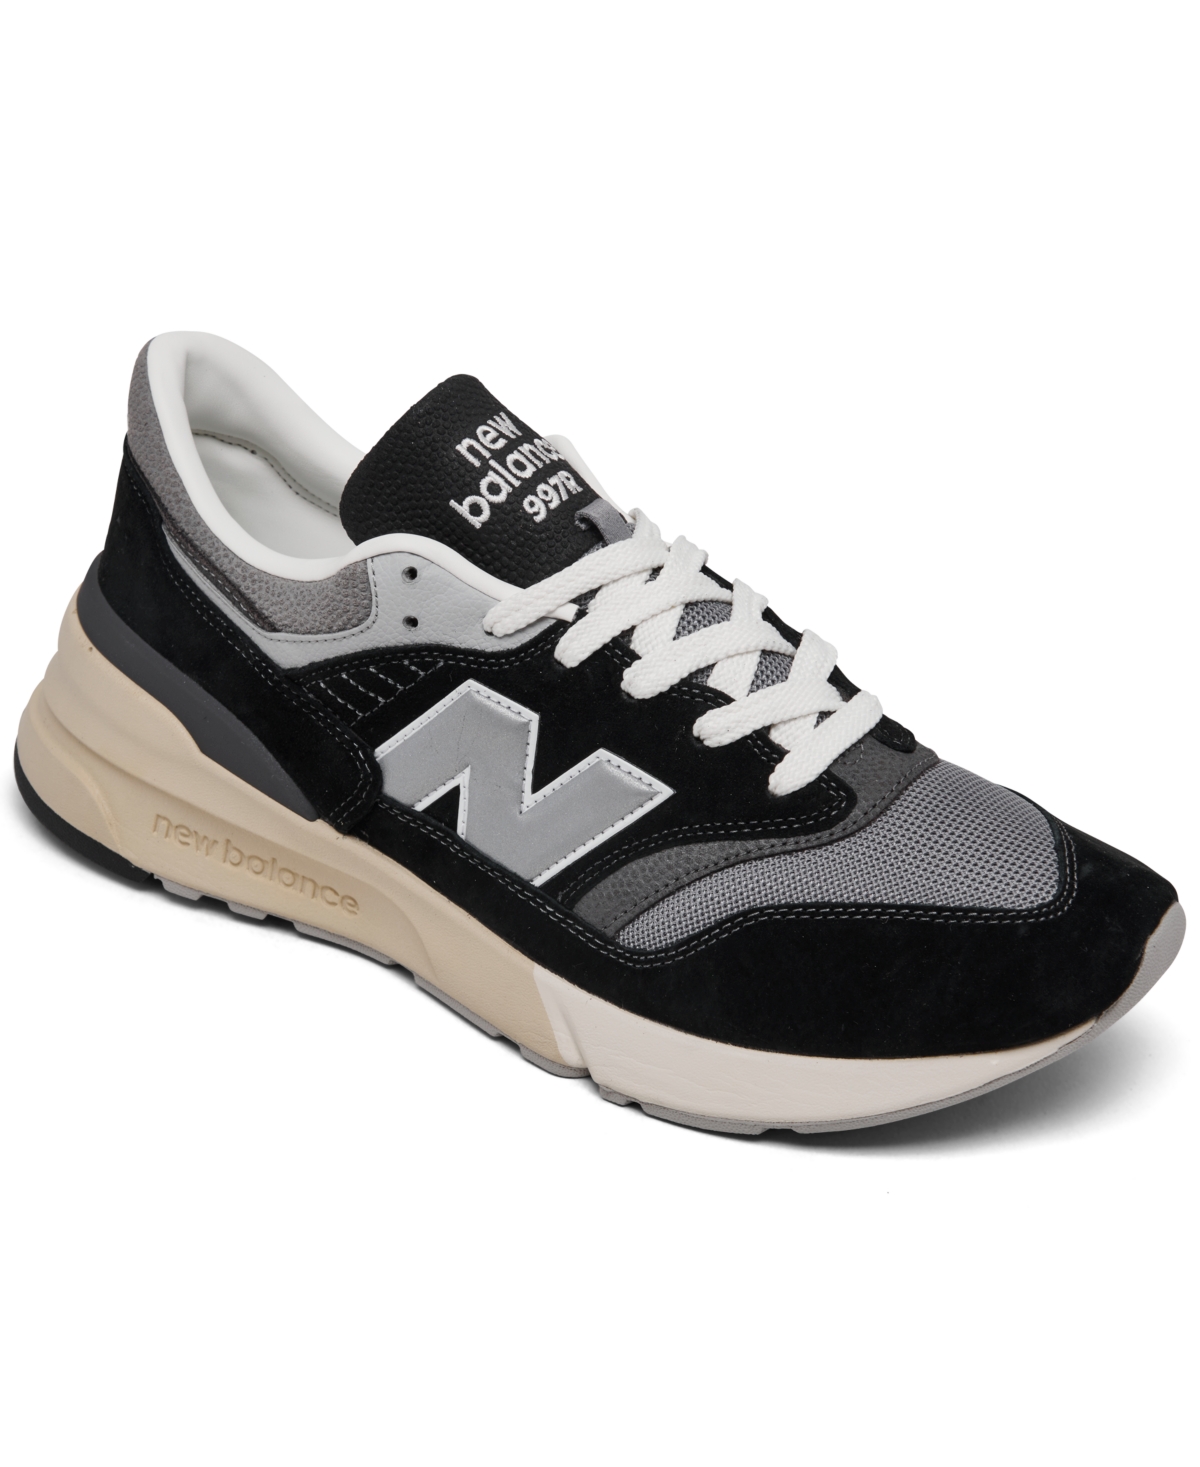 Men's Casual Fashion Sneakers from Finish Line - Black